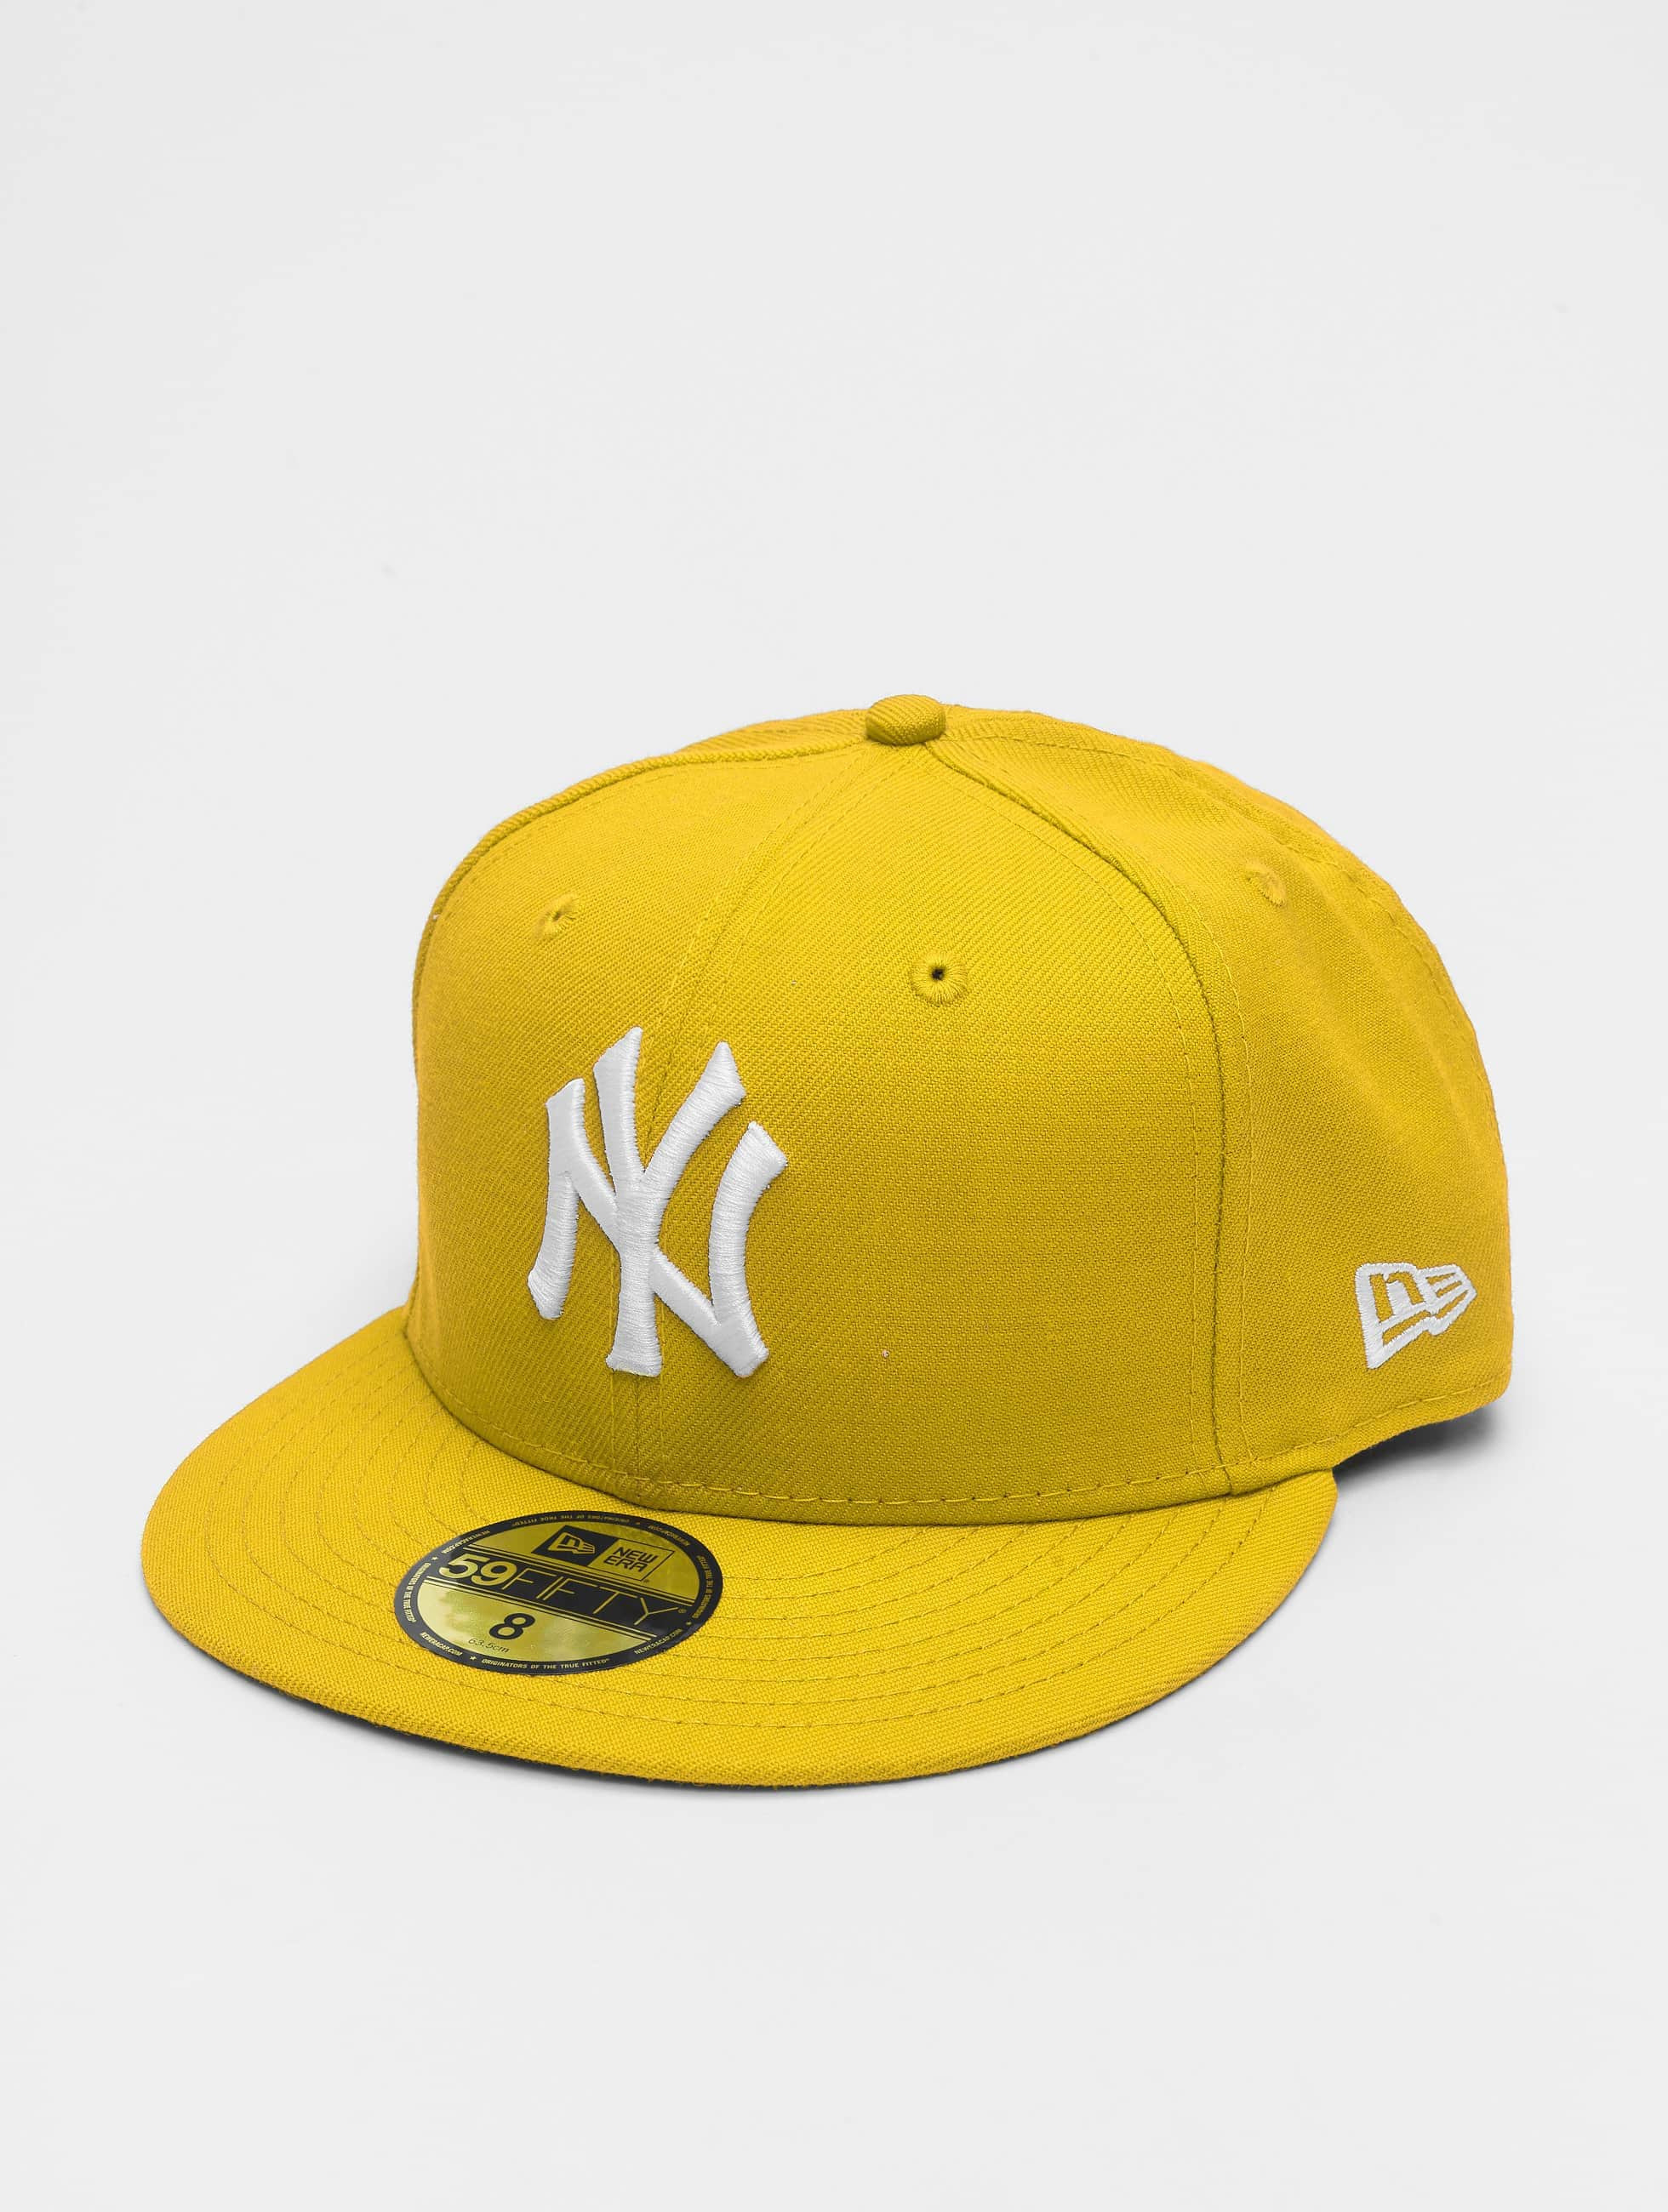 New Era Casquette / Fitted MLB Basic NY Yankees 59Fifty en jaune